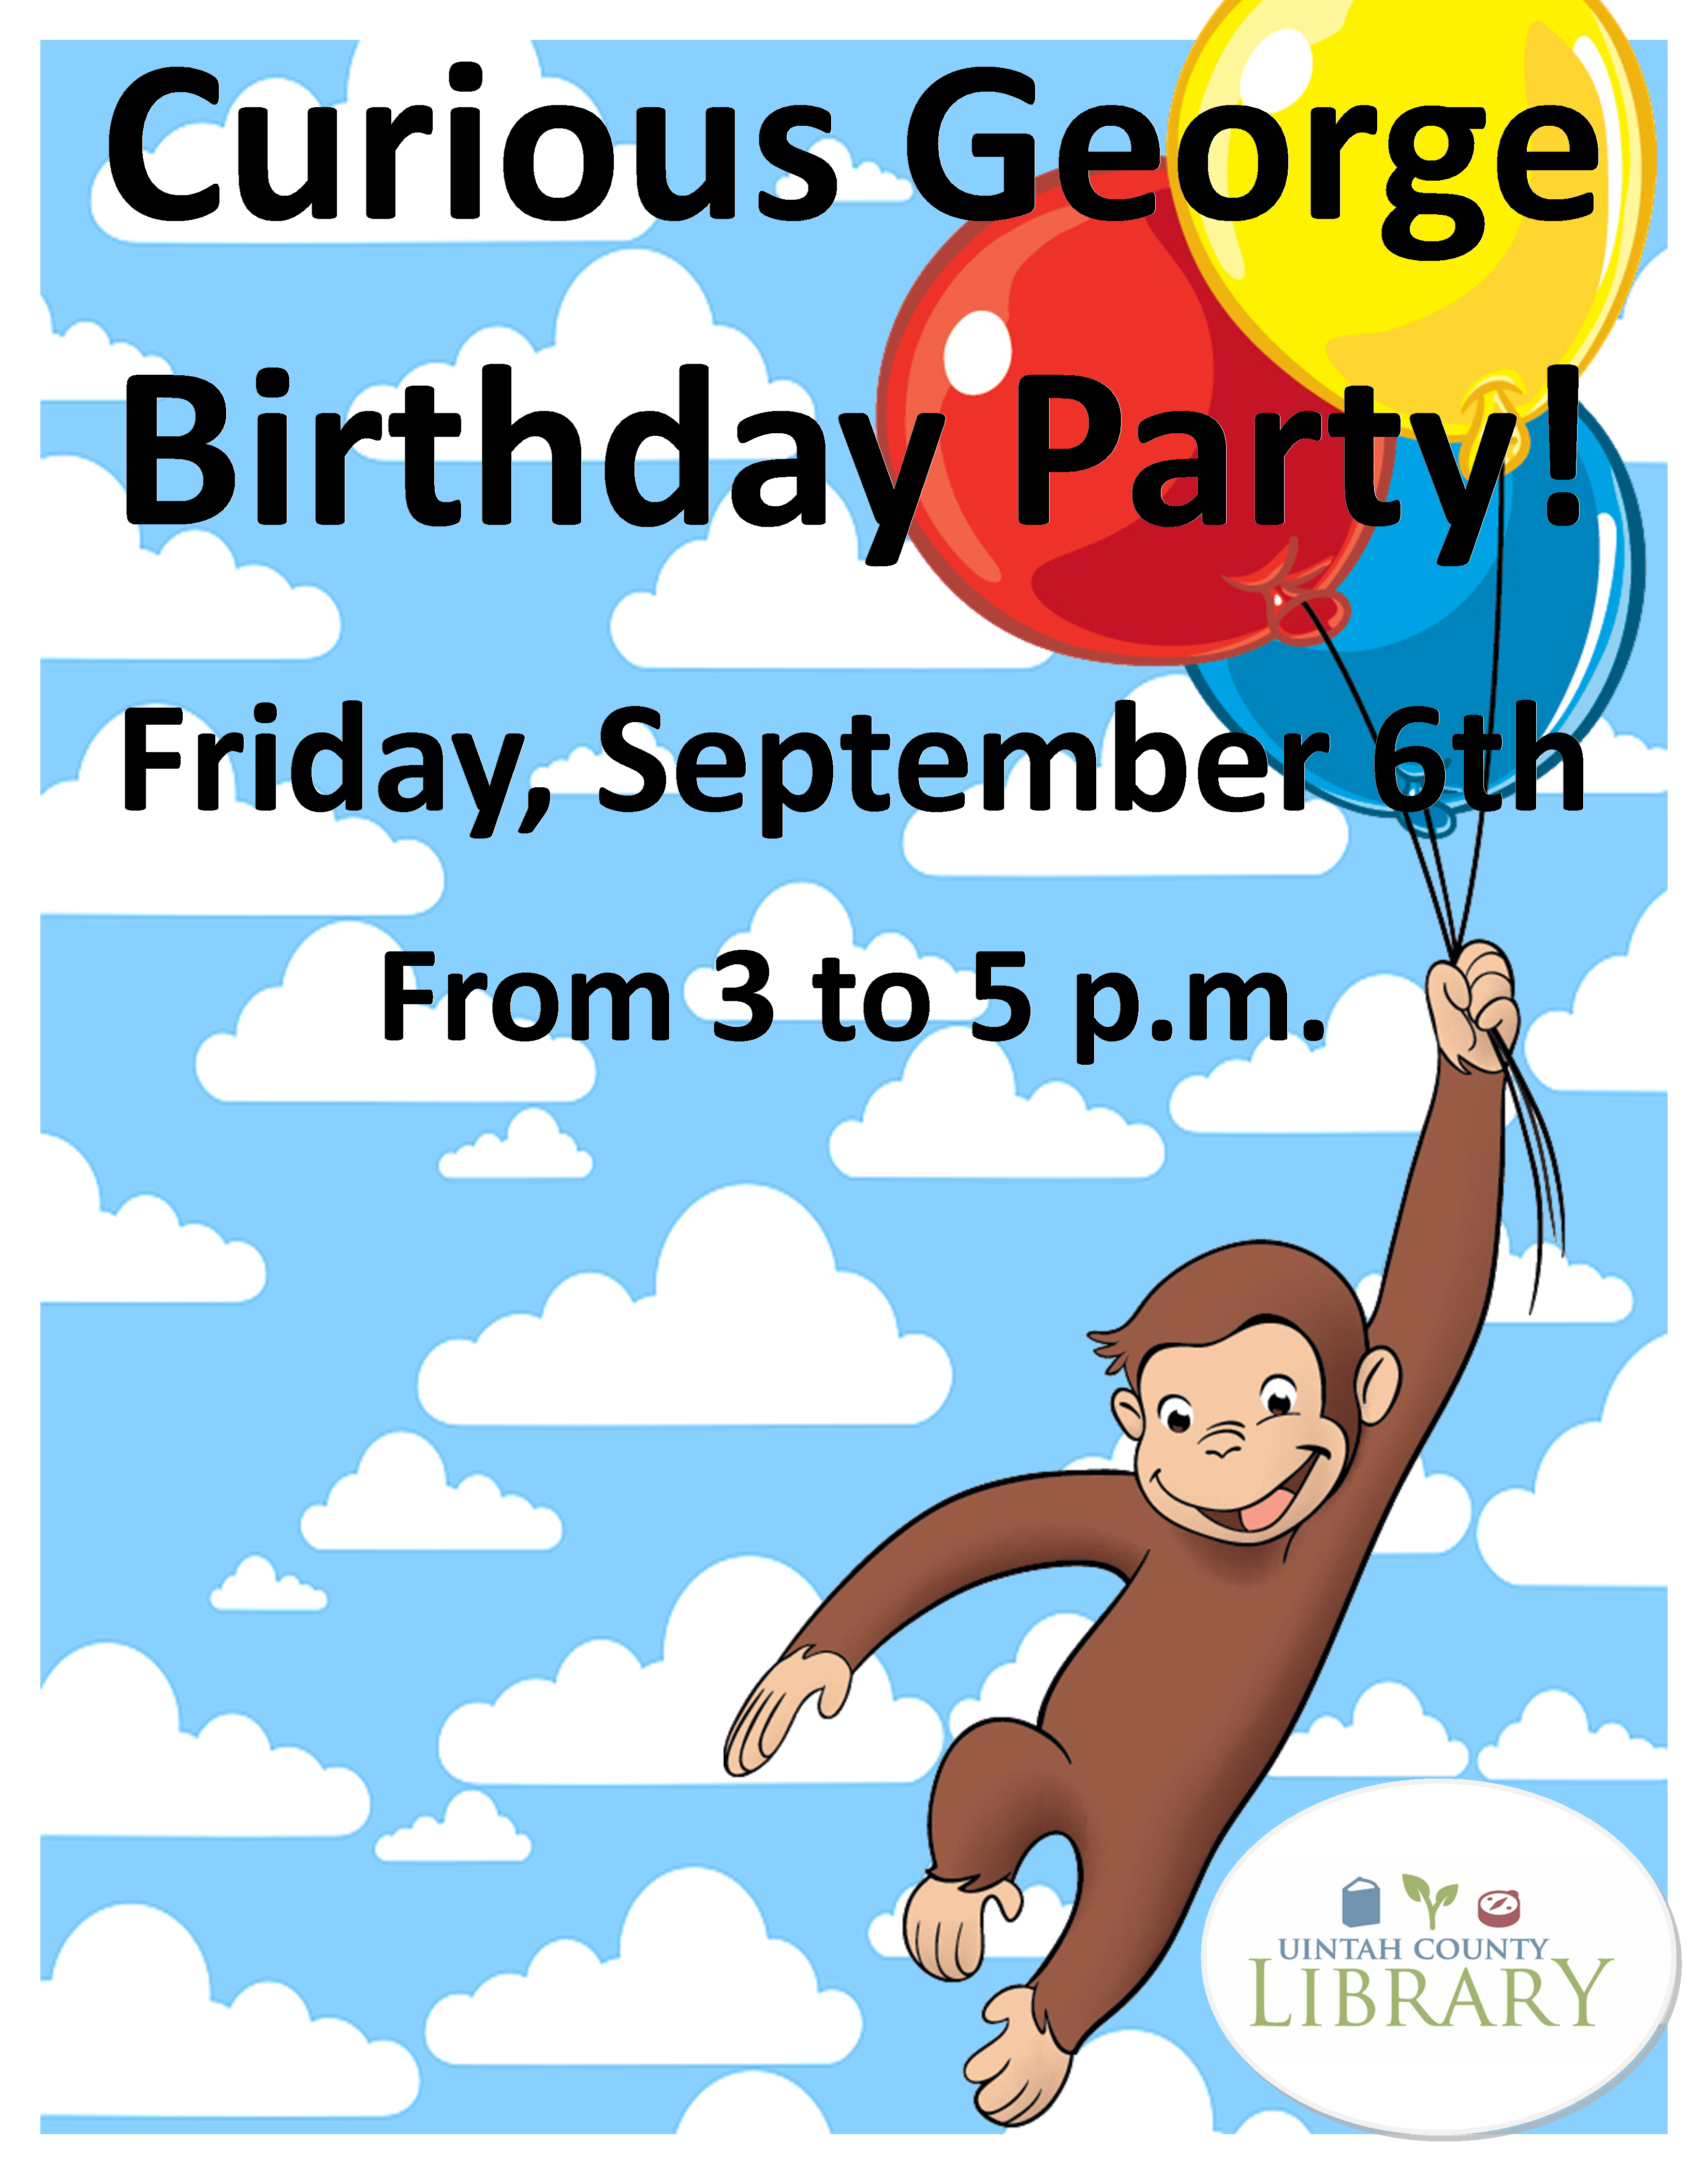 Image has clipart of curious george holding three balloons (yellow, red, and blue), a copy of the Uintah County Library logo, clouds, and text that reads: Curious George Birthday Party! Friday September 6th From 3 to 5 p.m. 